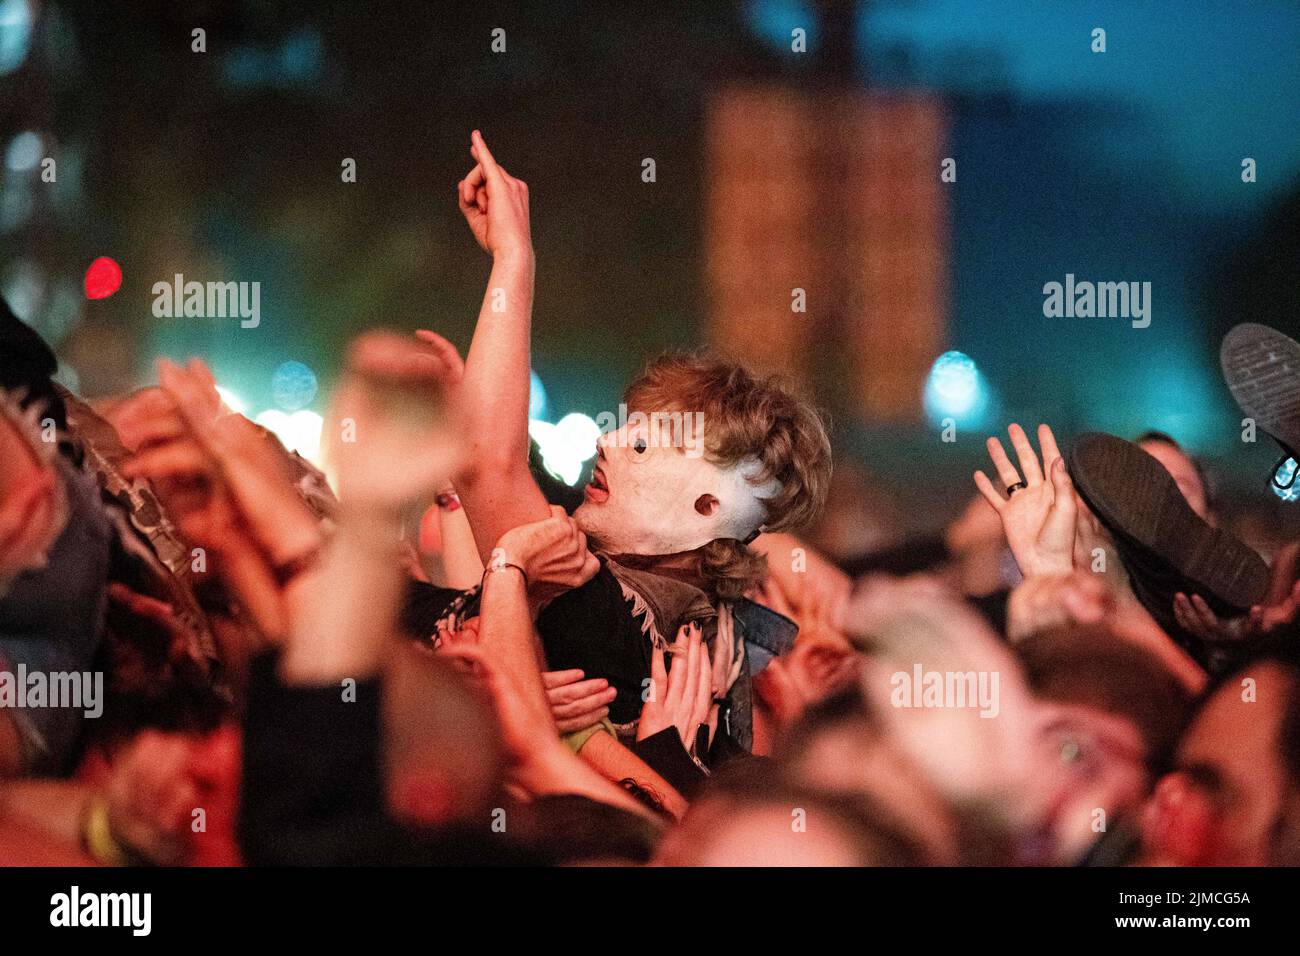 Wacken, Germany. 05th Aug, 2022. A festival-goer is carried over the crowd while crowdsurfing during the concert of the band Slipknot at the Wacken Open Air Festival. The WOA is considered the largest heavy metal festival in the world. Credit: Daniel Reinhardt/dpa/Alamy Live News Stock Photo